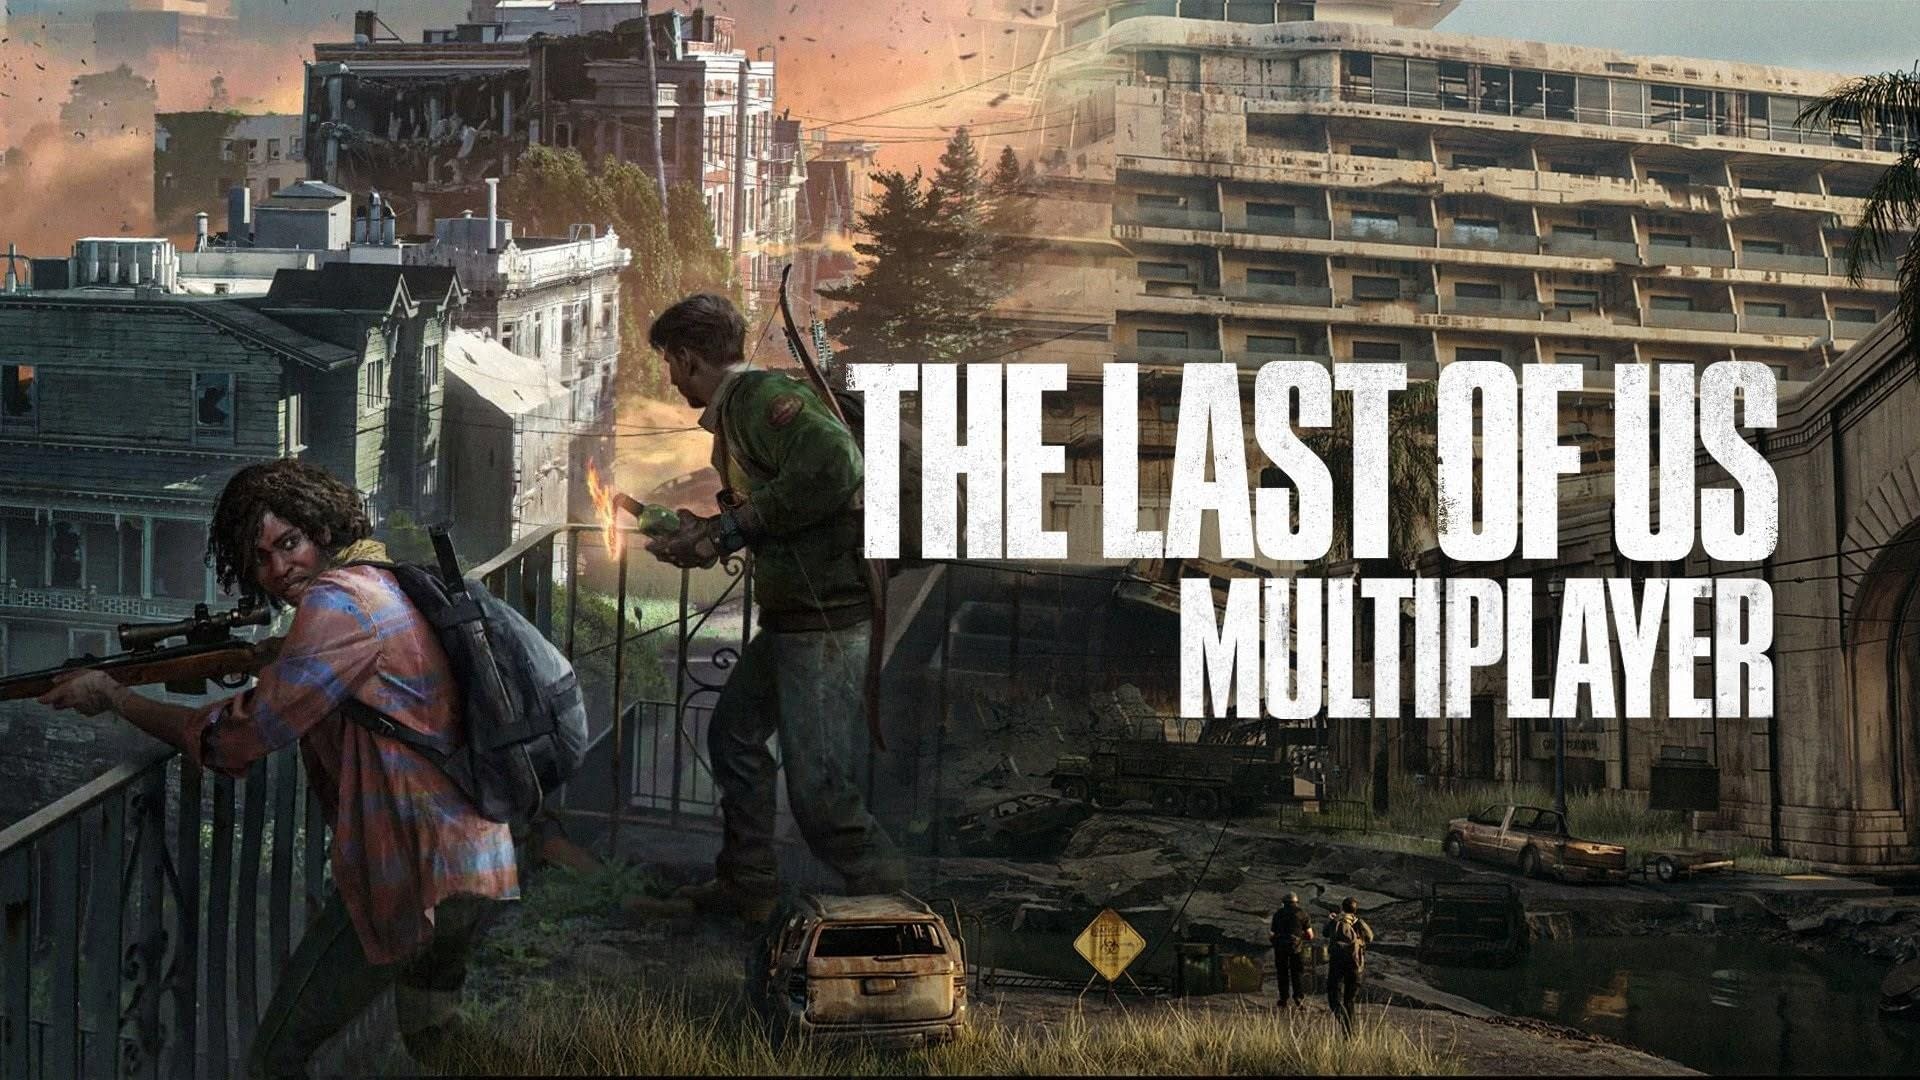 The Last of Us was Validated in the Development Phase of Multiplayer